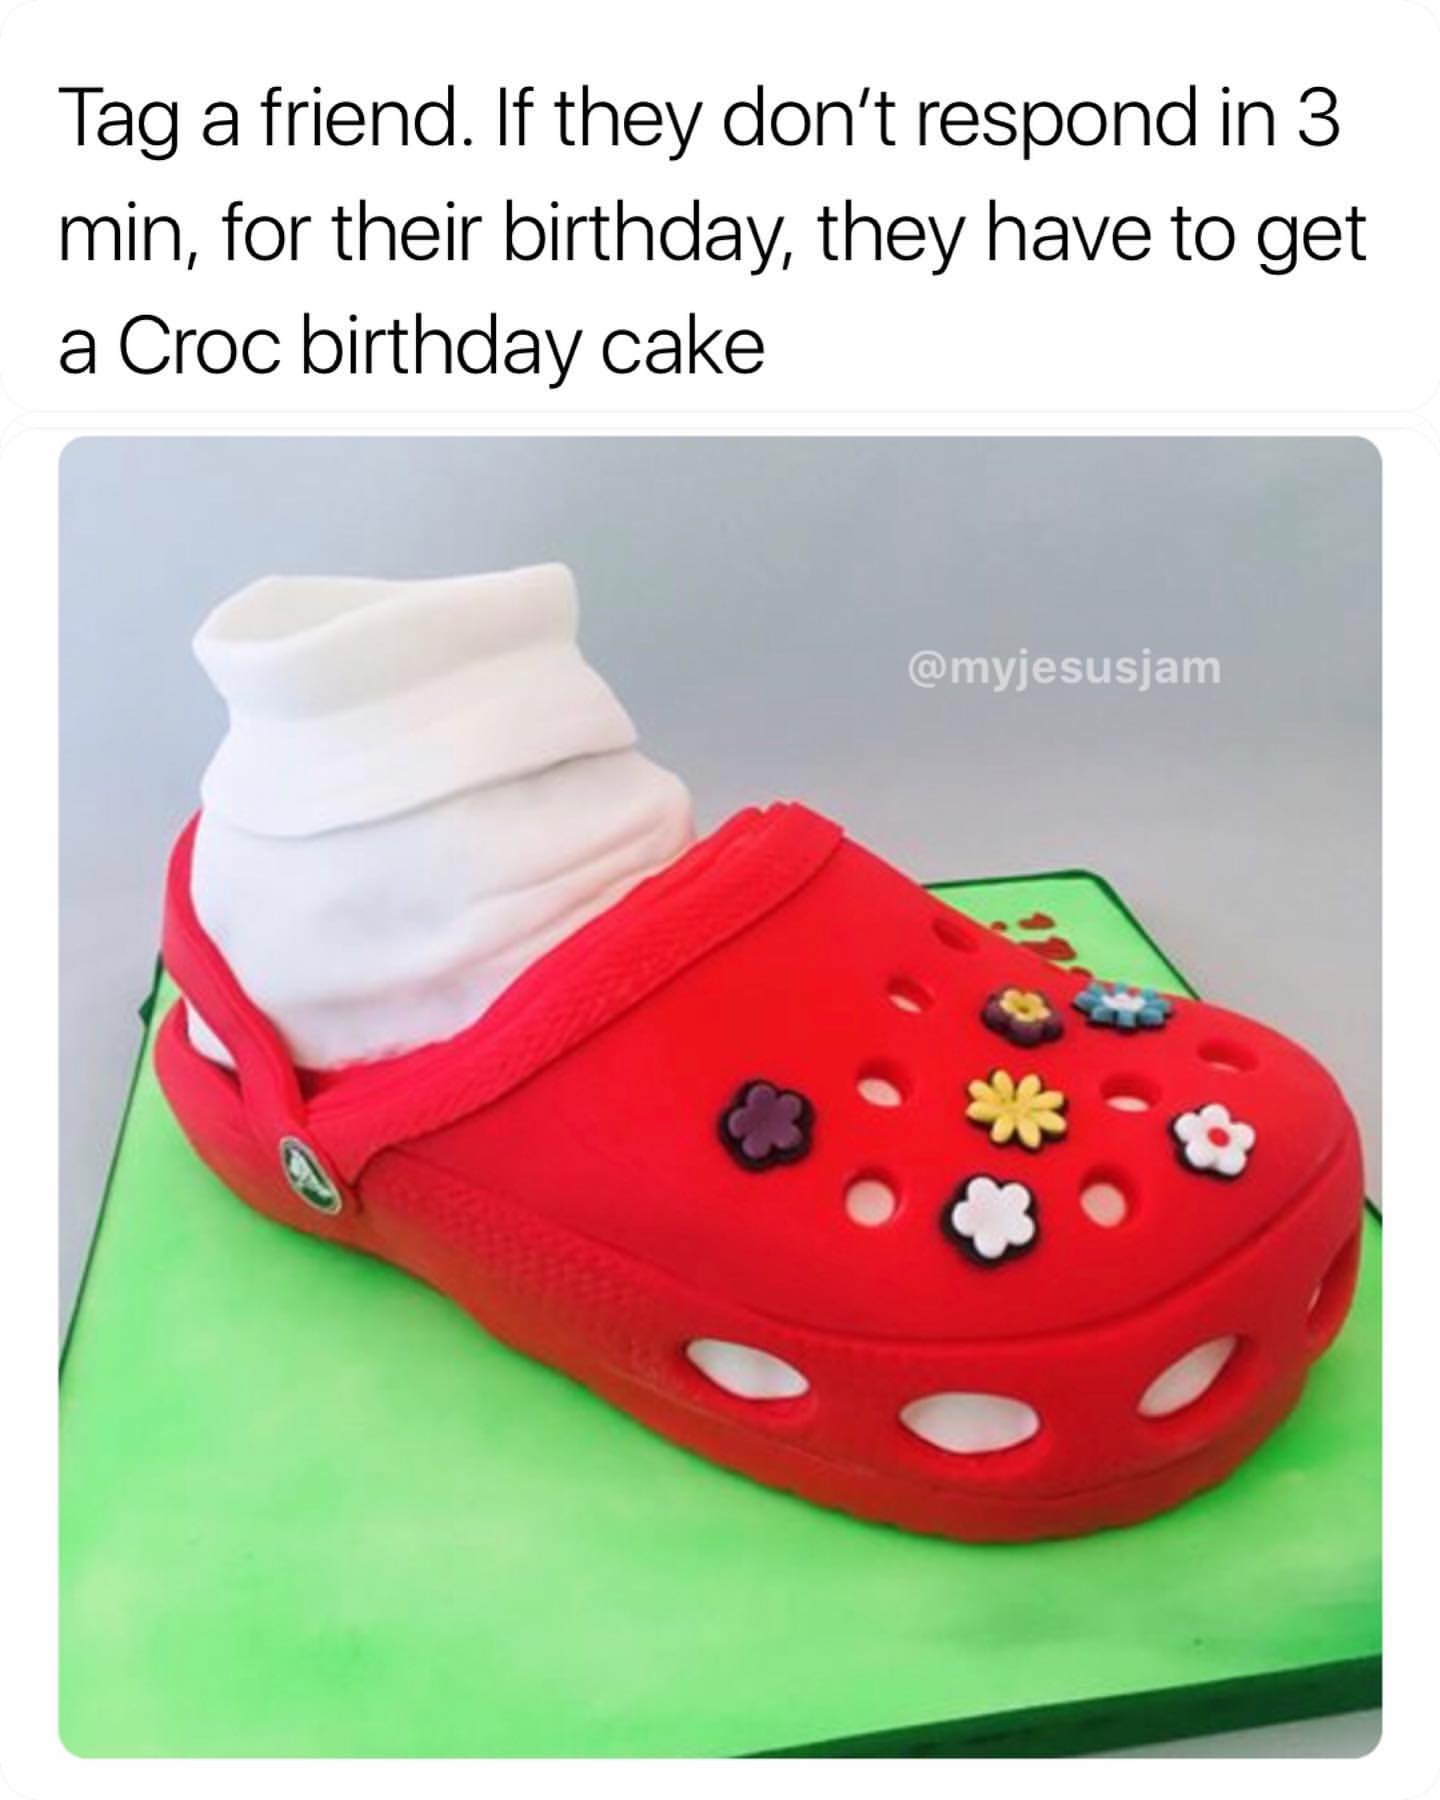 Tag a friend. If they don't respond in 3 min, for their birthday, they have to get a Croc birthday cake.